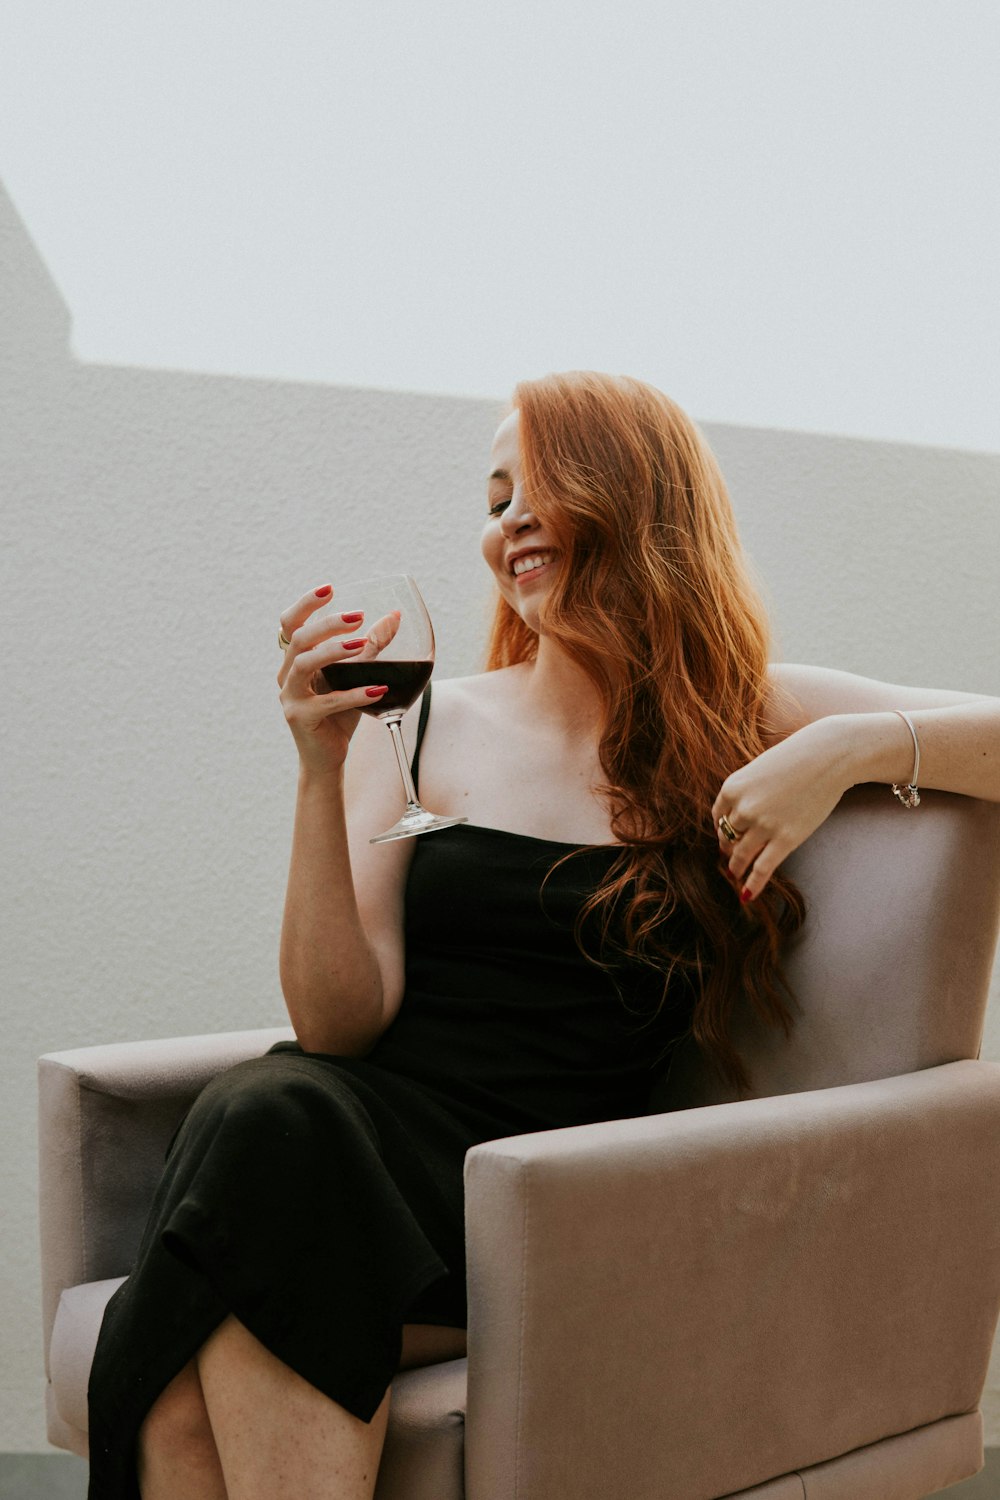 a woman sitting on a couch and holding a glass of wine